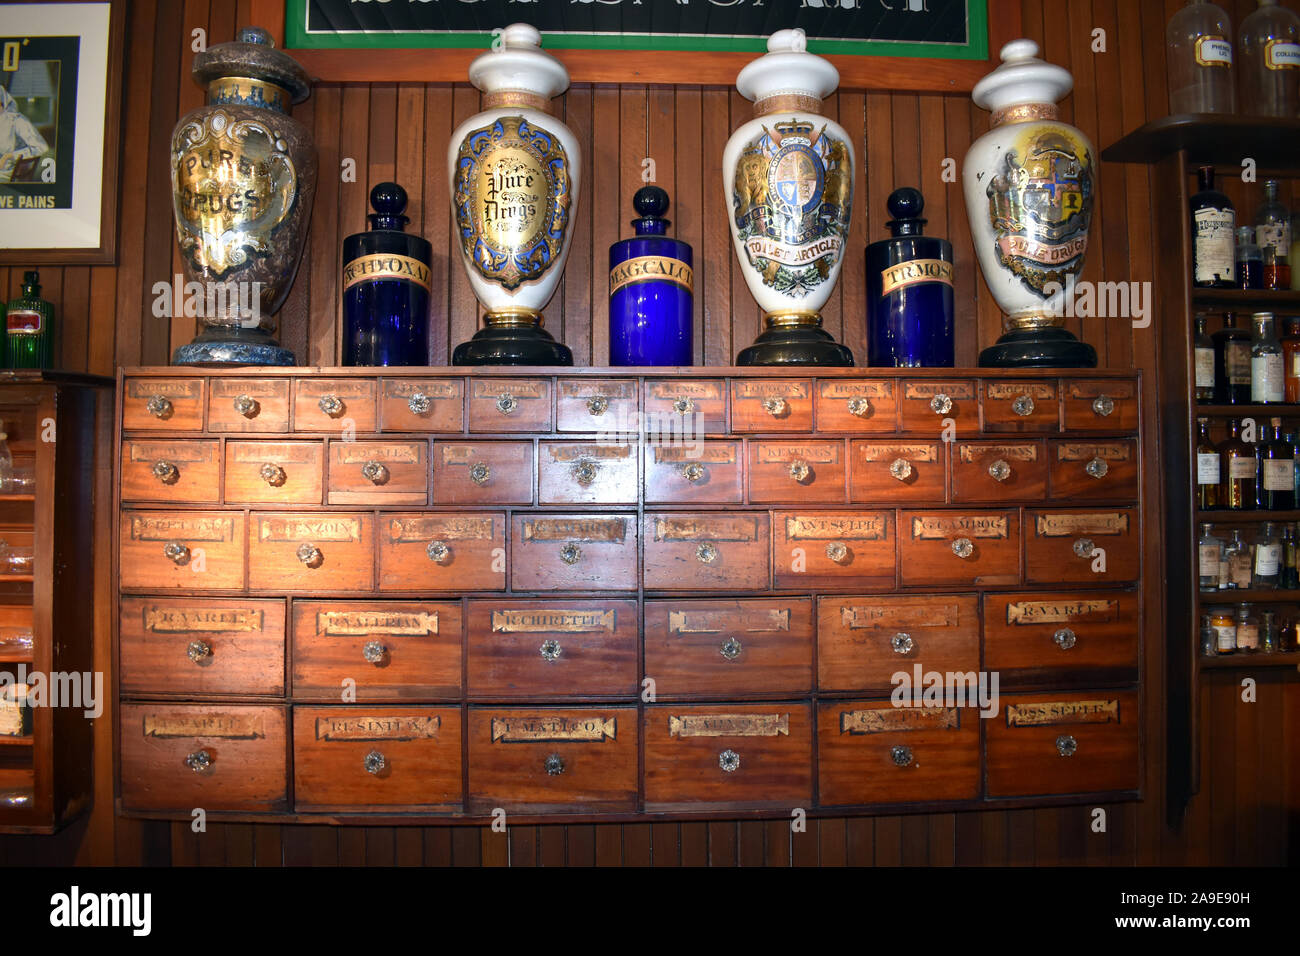 A ancient set of timber drawers set in an replica of an apothecary shop Stock Photo